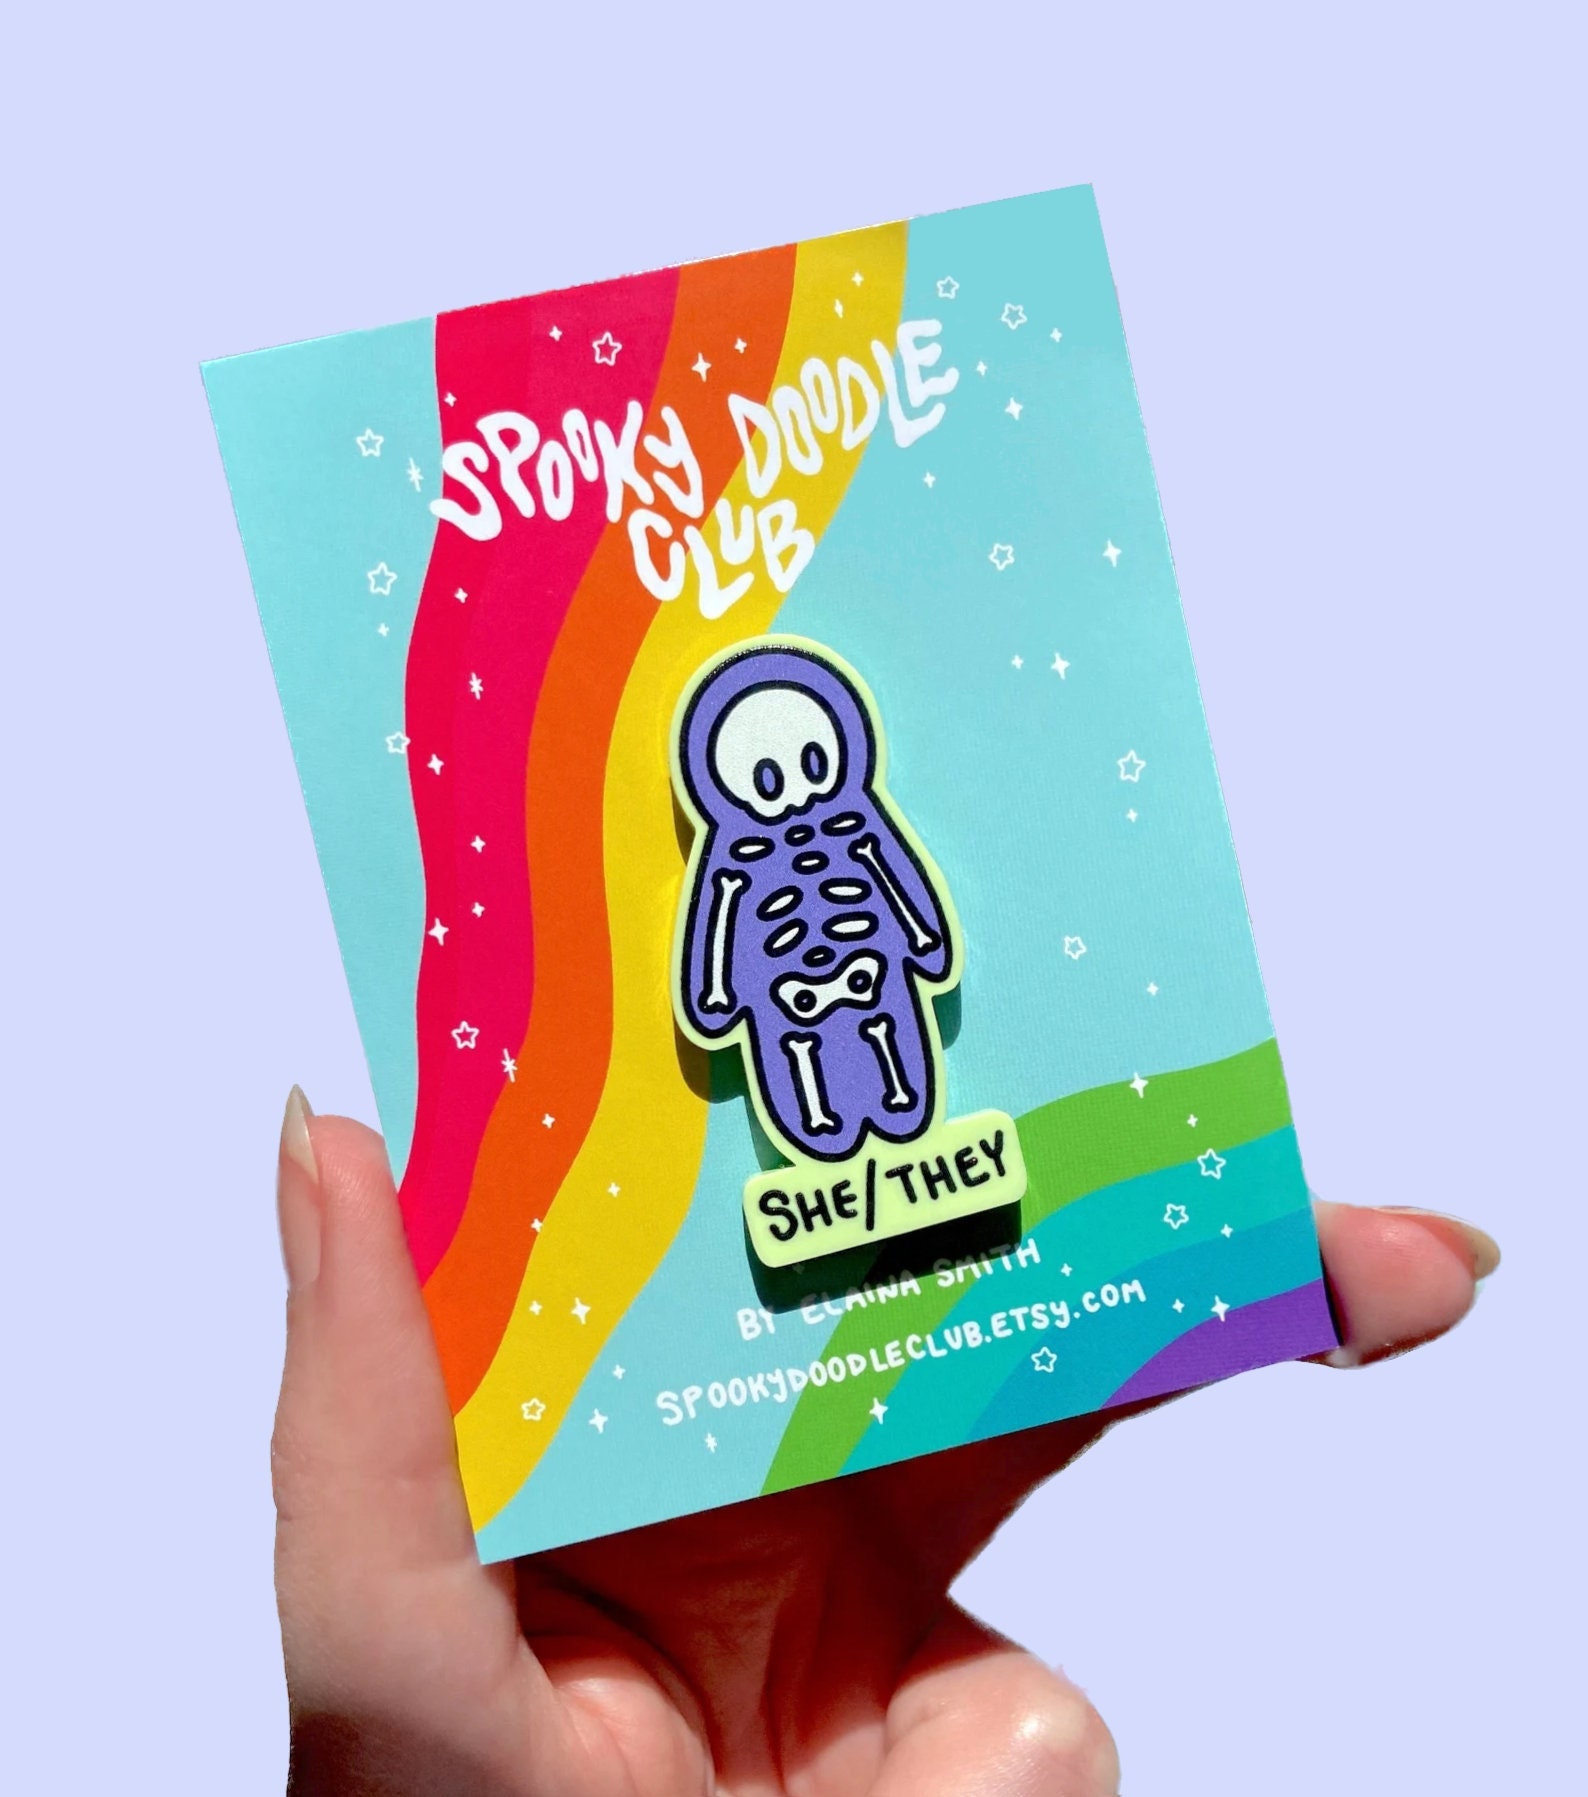 SHE/THEY Pronoun Pin Purple Acrylic Gender Identity Badge, Cute Witchy  Style Pride Accessory Spooky Doodle Club 2 Inch -  Hong Kong